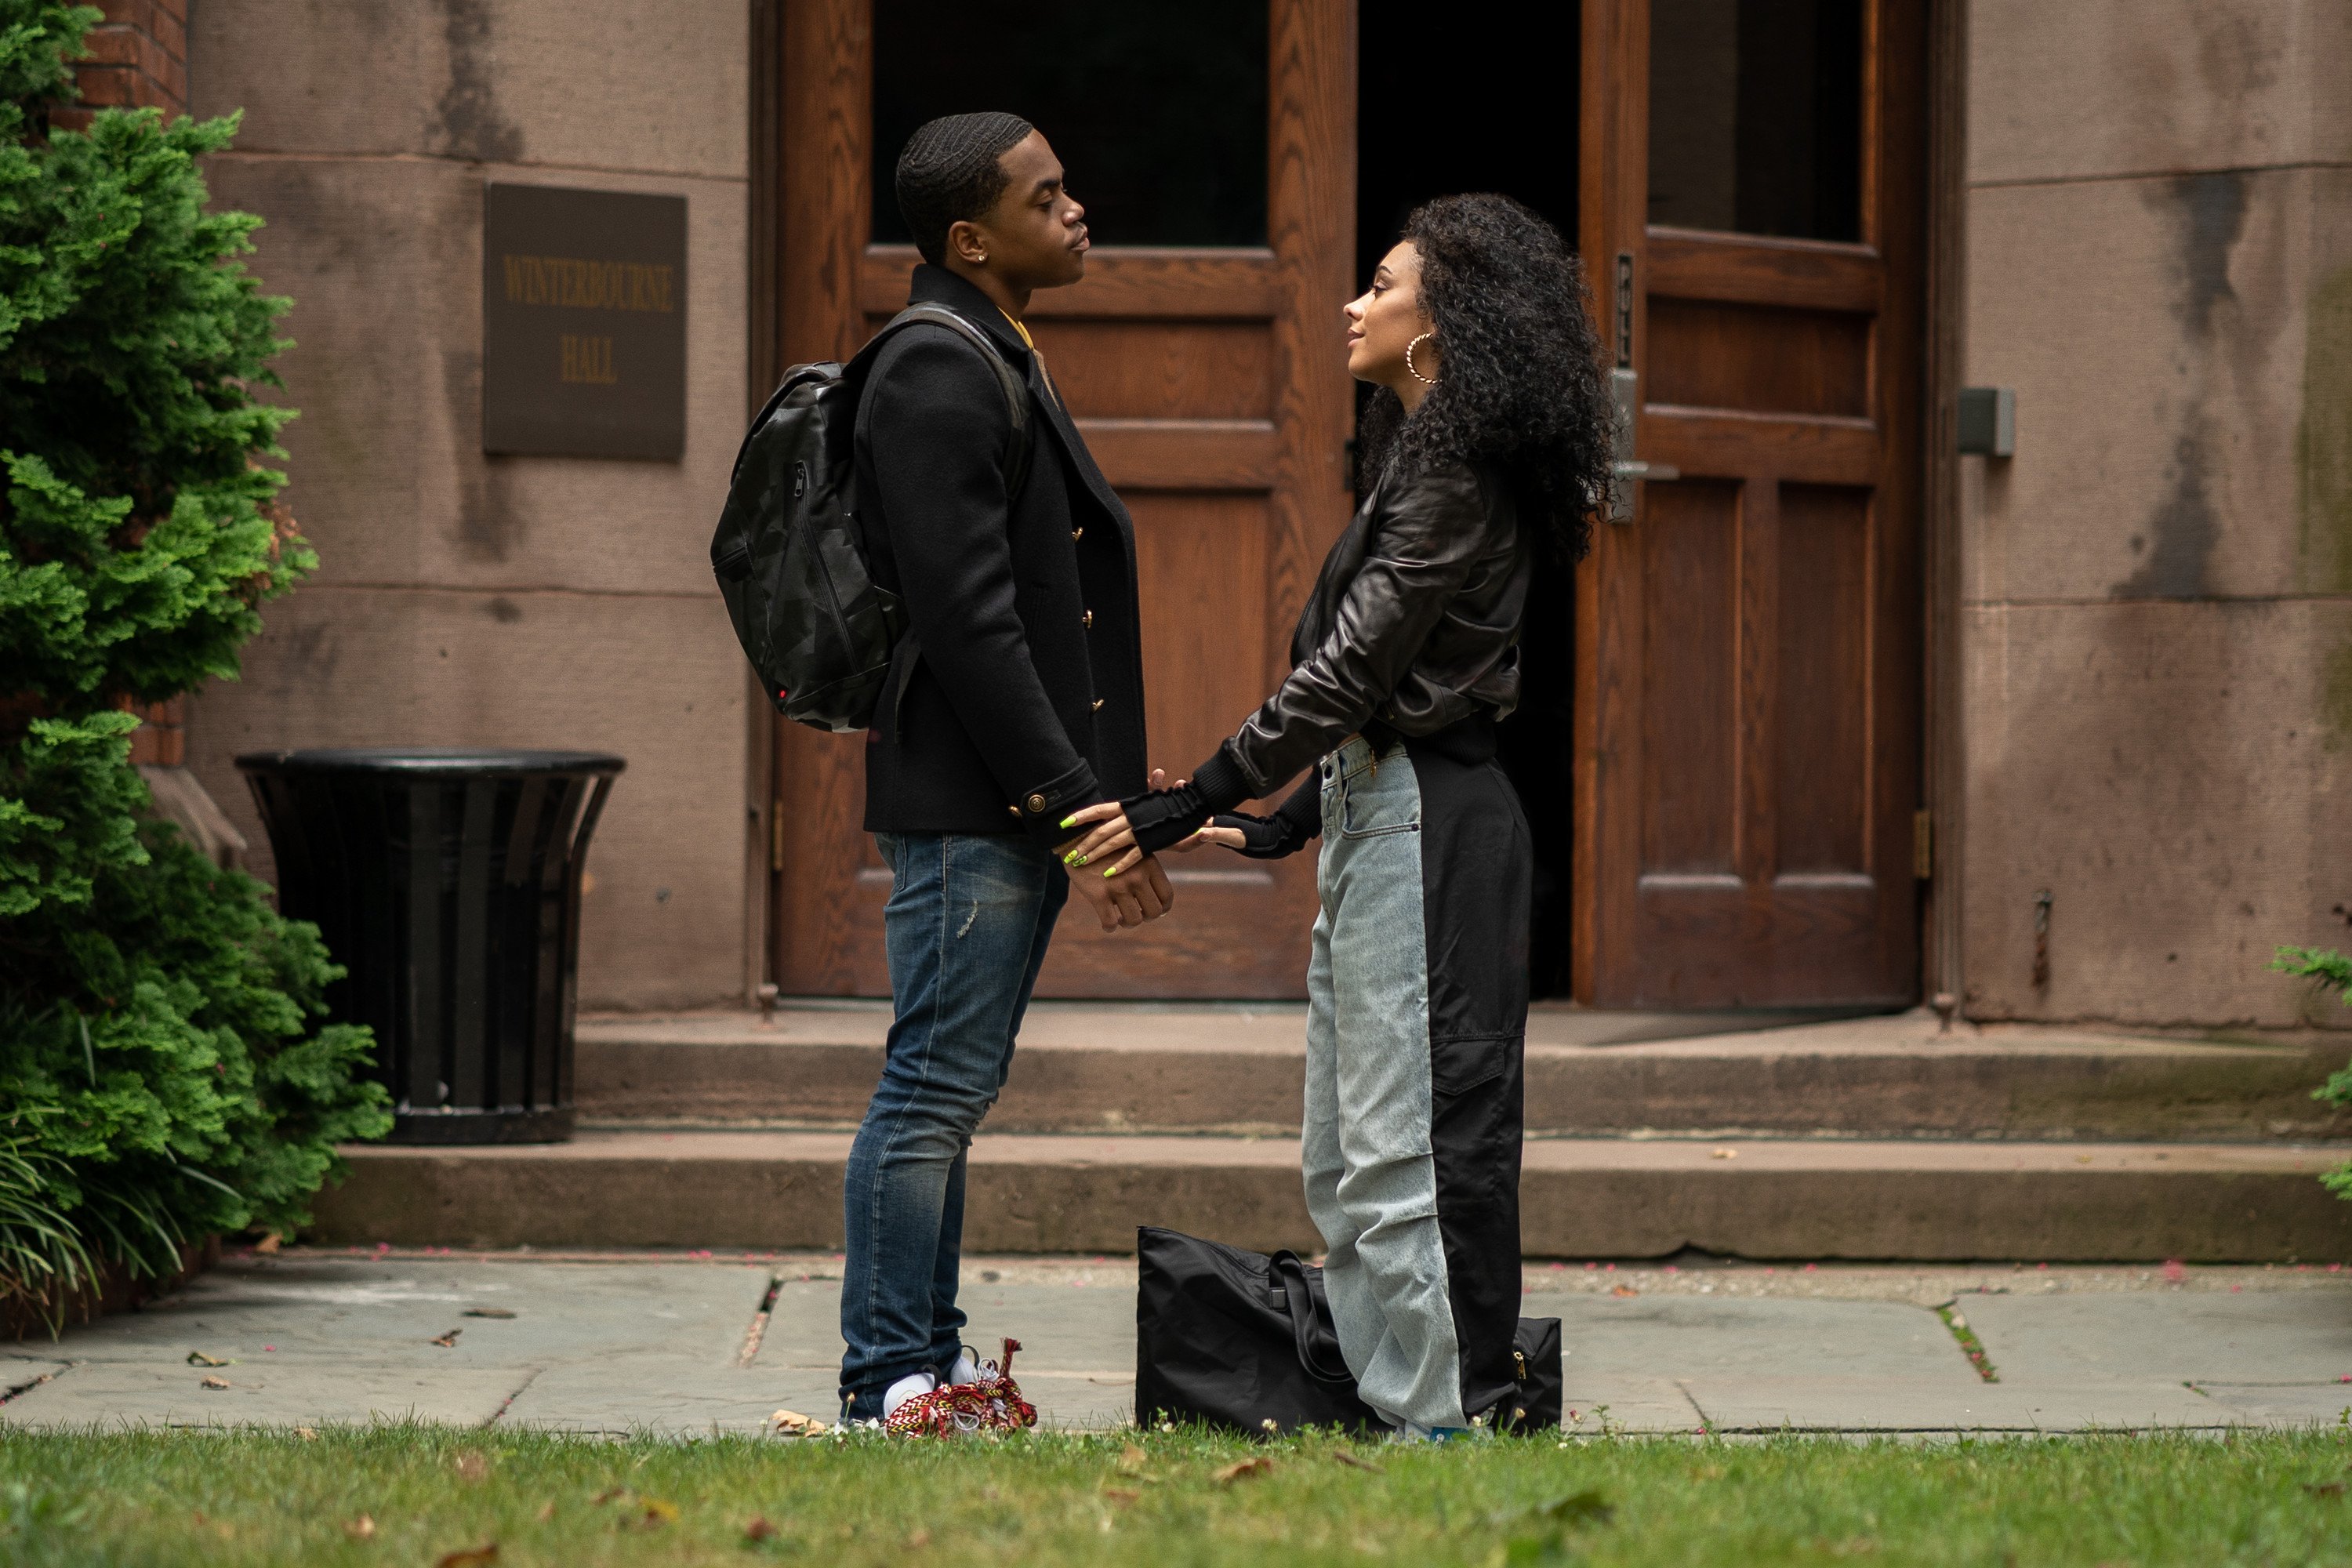 Michael Rainey Jr. as Tariq St. Patrick and Alix Lapri as Effie Moralas holding hands on campus in 'Power Book II: Ghost'